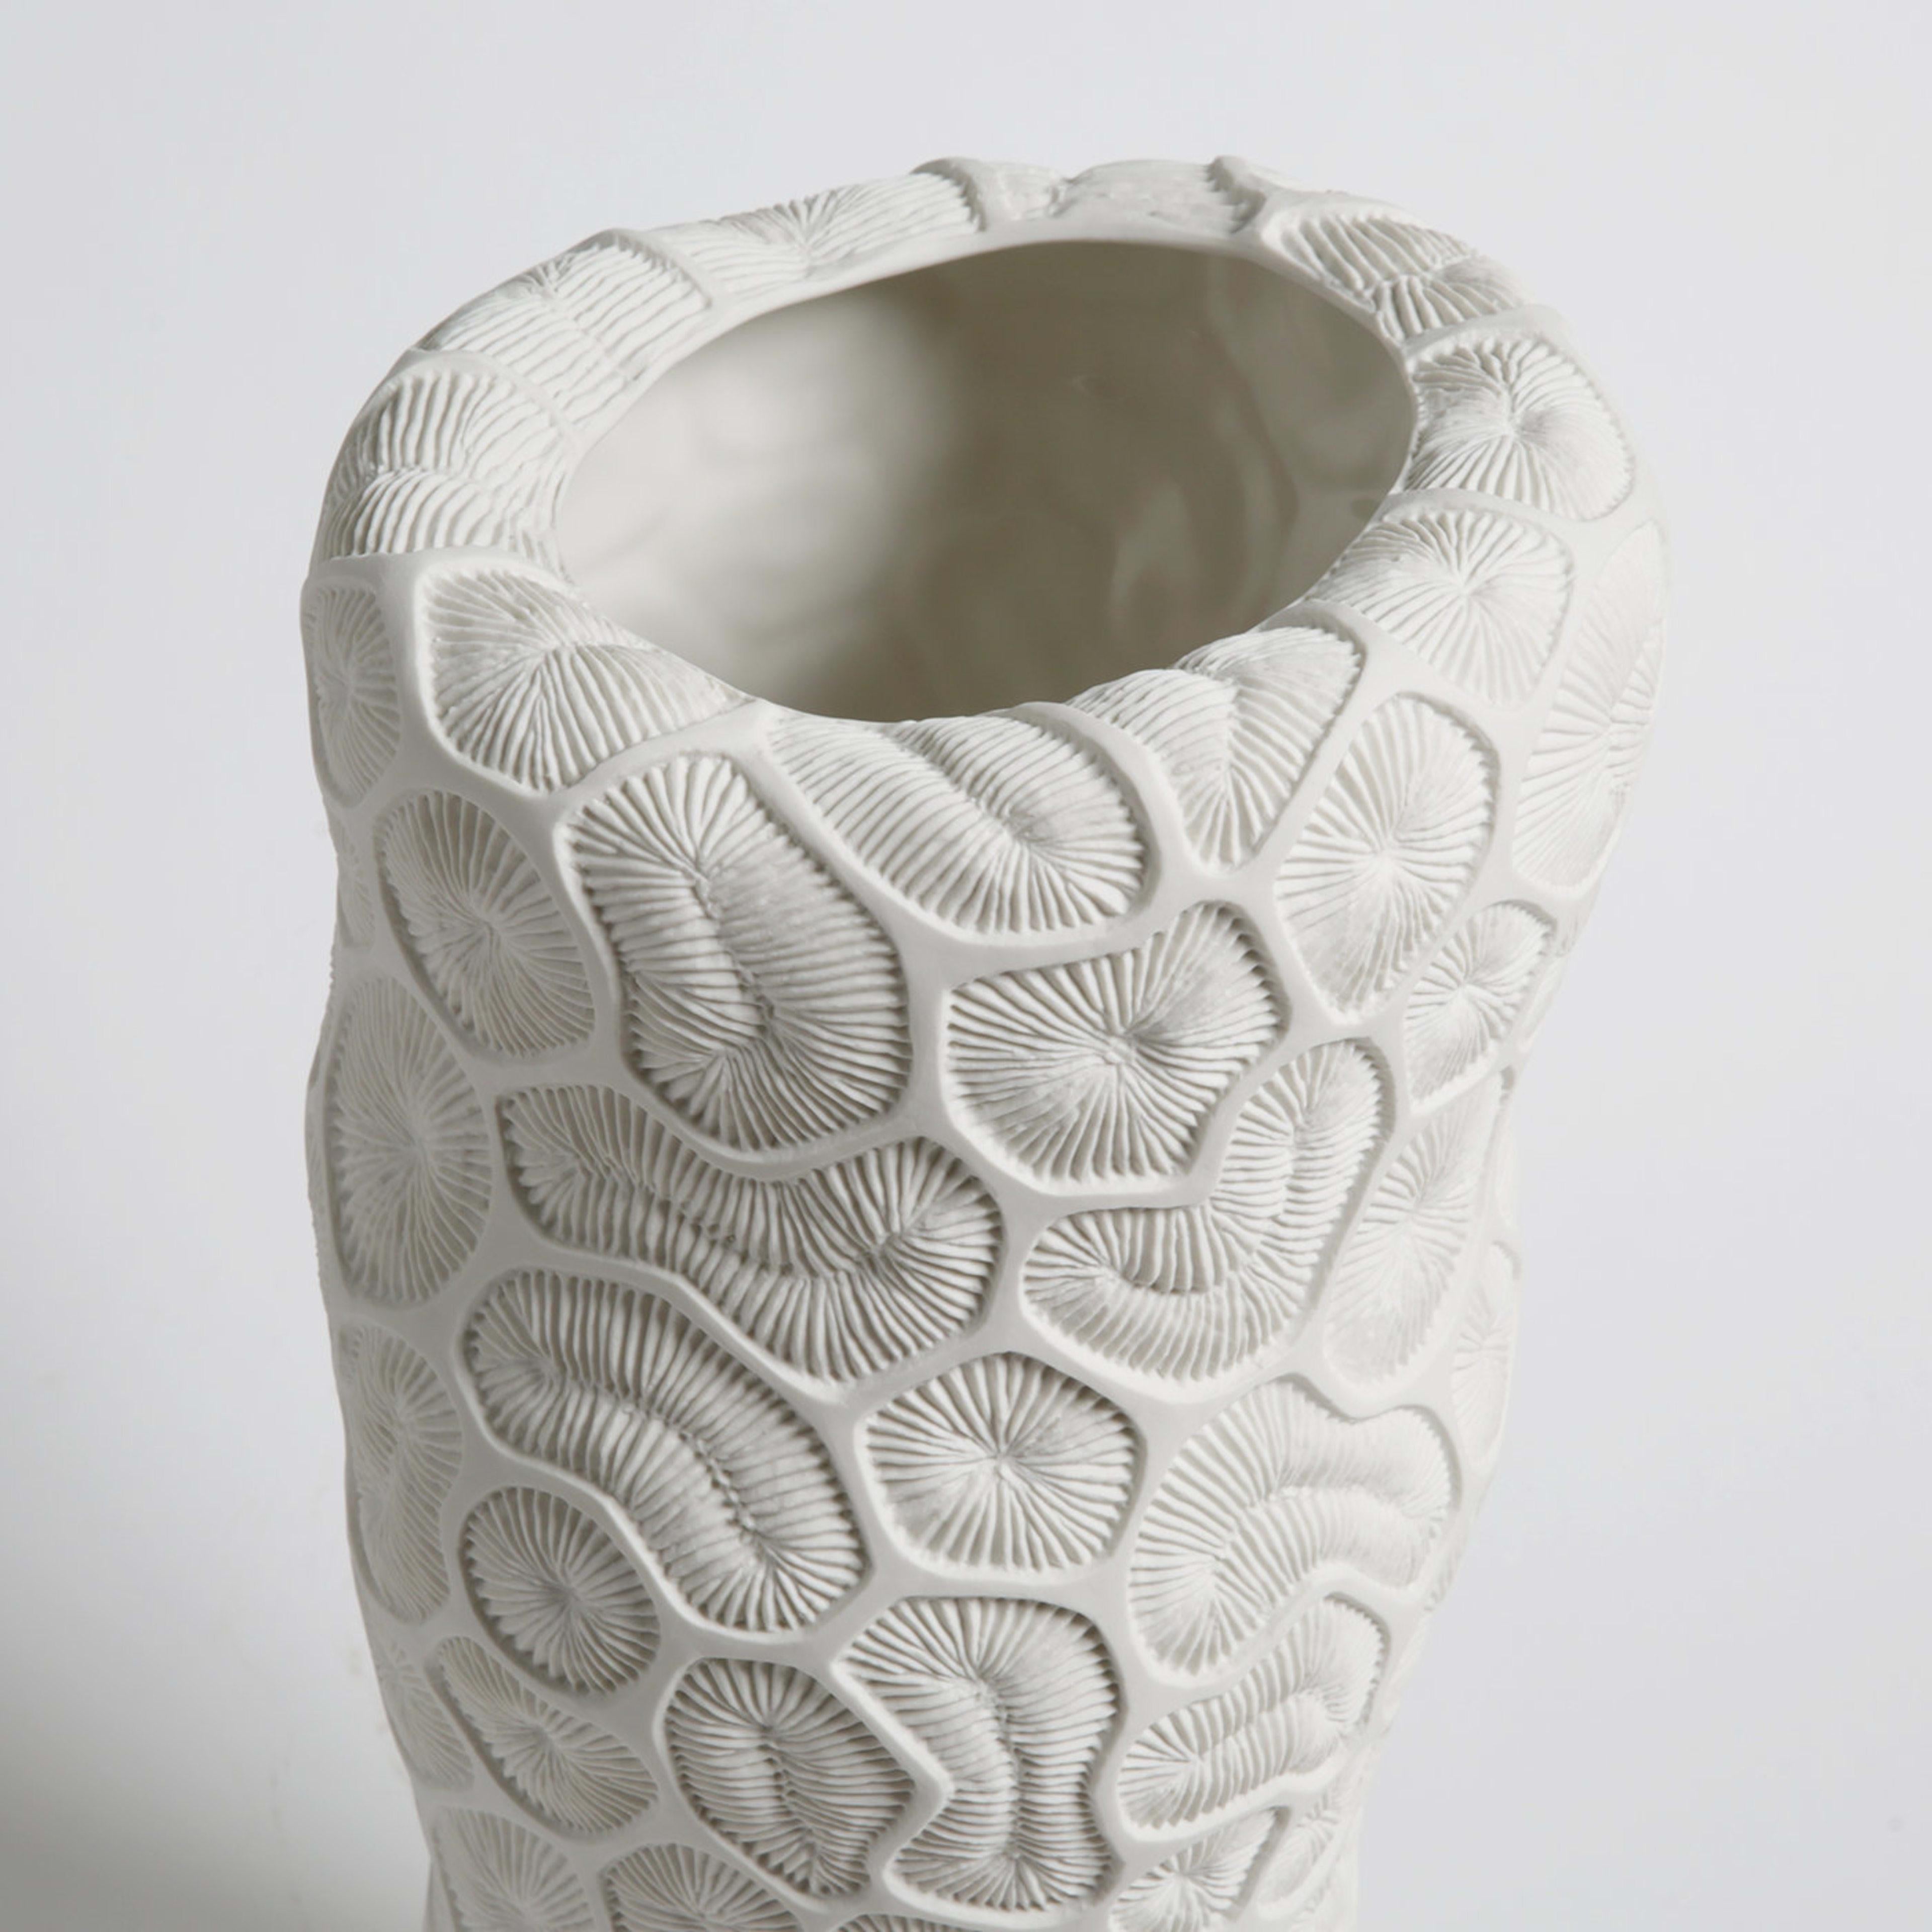 Fossils of madrepore inspire the minute texture decorating this striking vase of the Fossilia collection. A meticulously crafted mold and the use of precious unglazed porcelain, or 